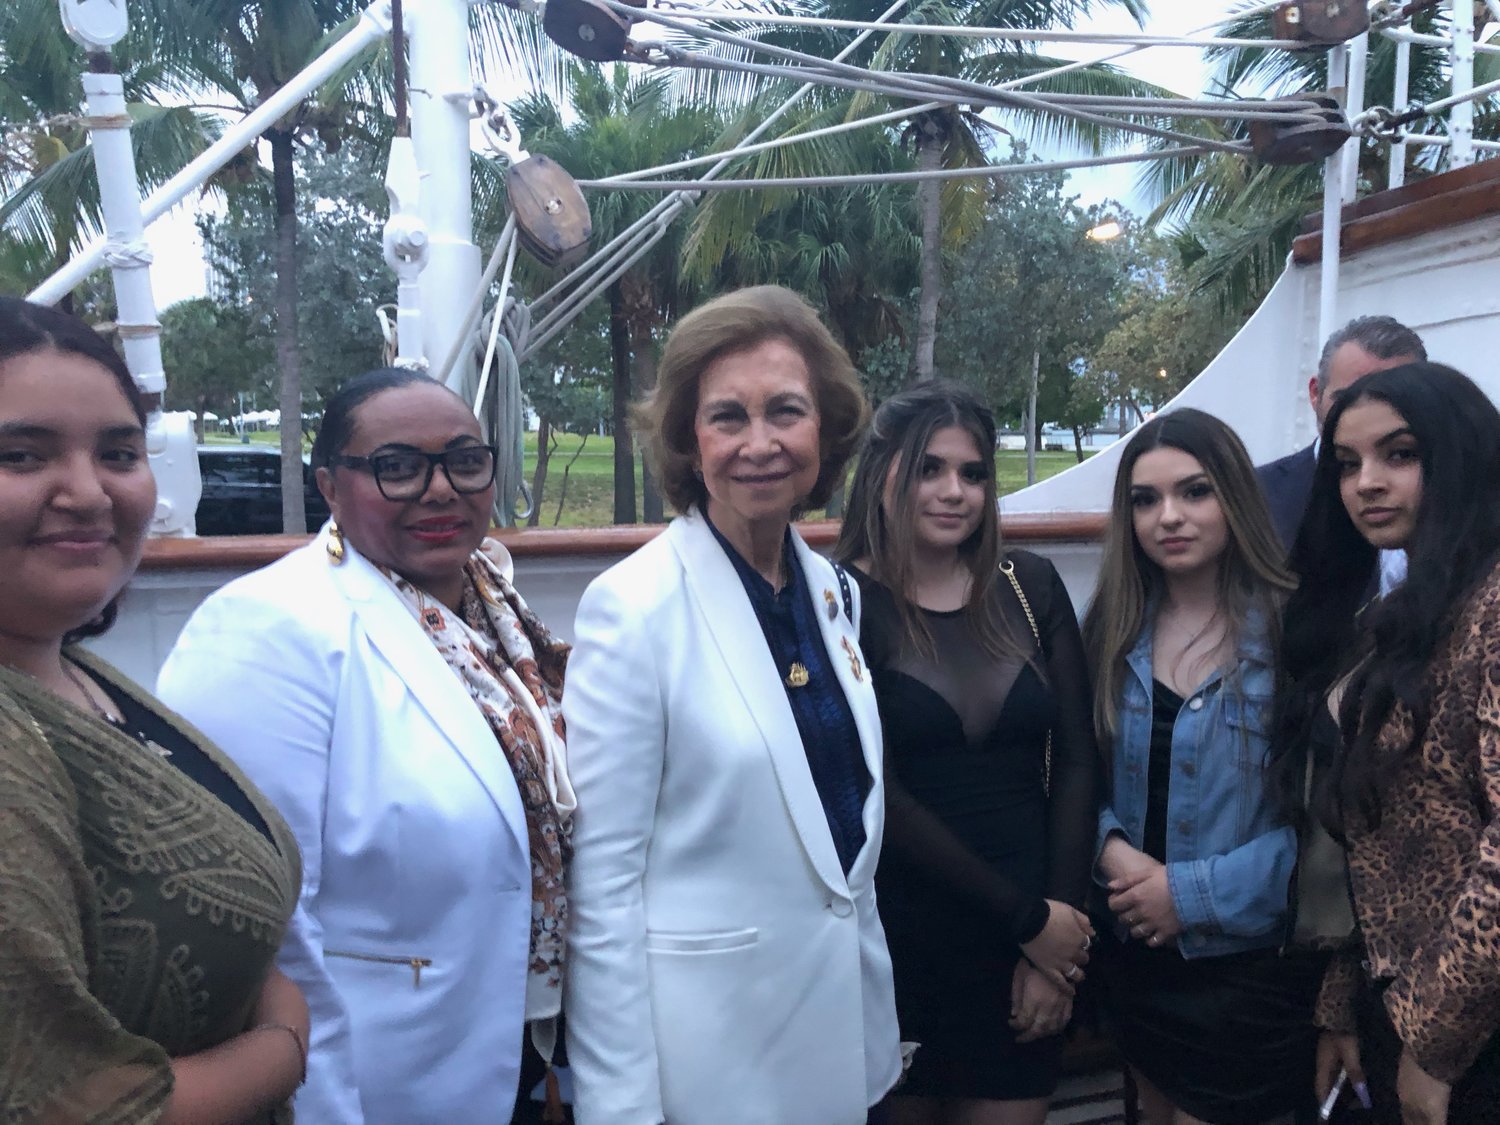 Principal Linda Johnson-Earsley and high school students from Everglades Preparatory Academy in Pahokee meet with Queen Sofia of Spain (center) in Miami.